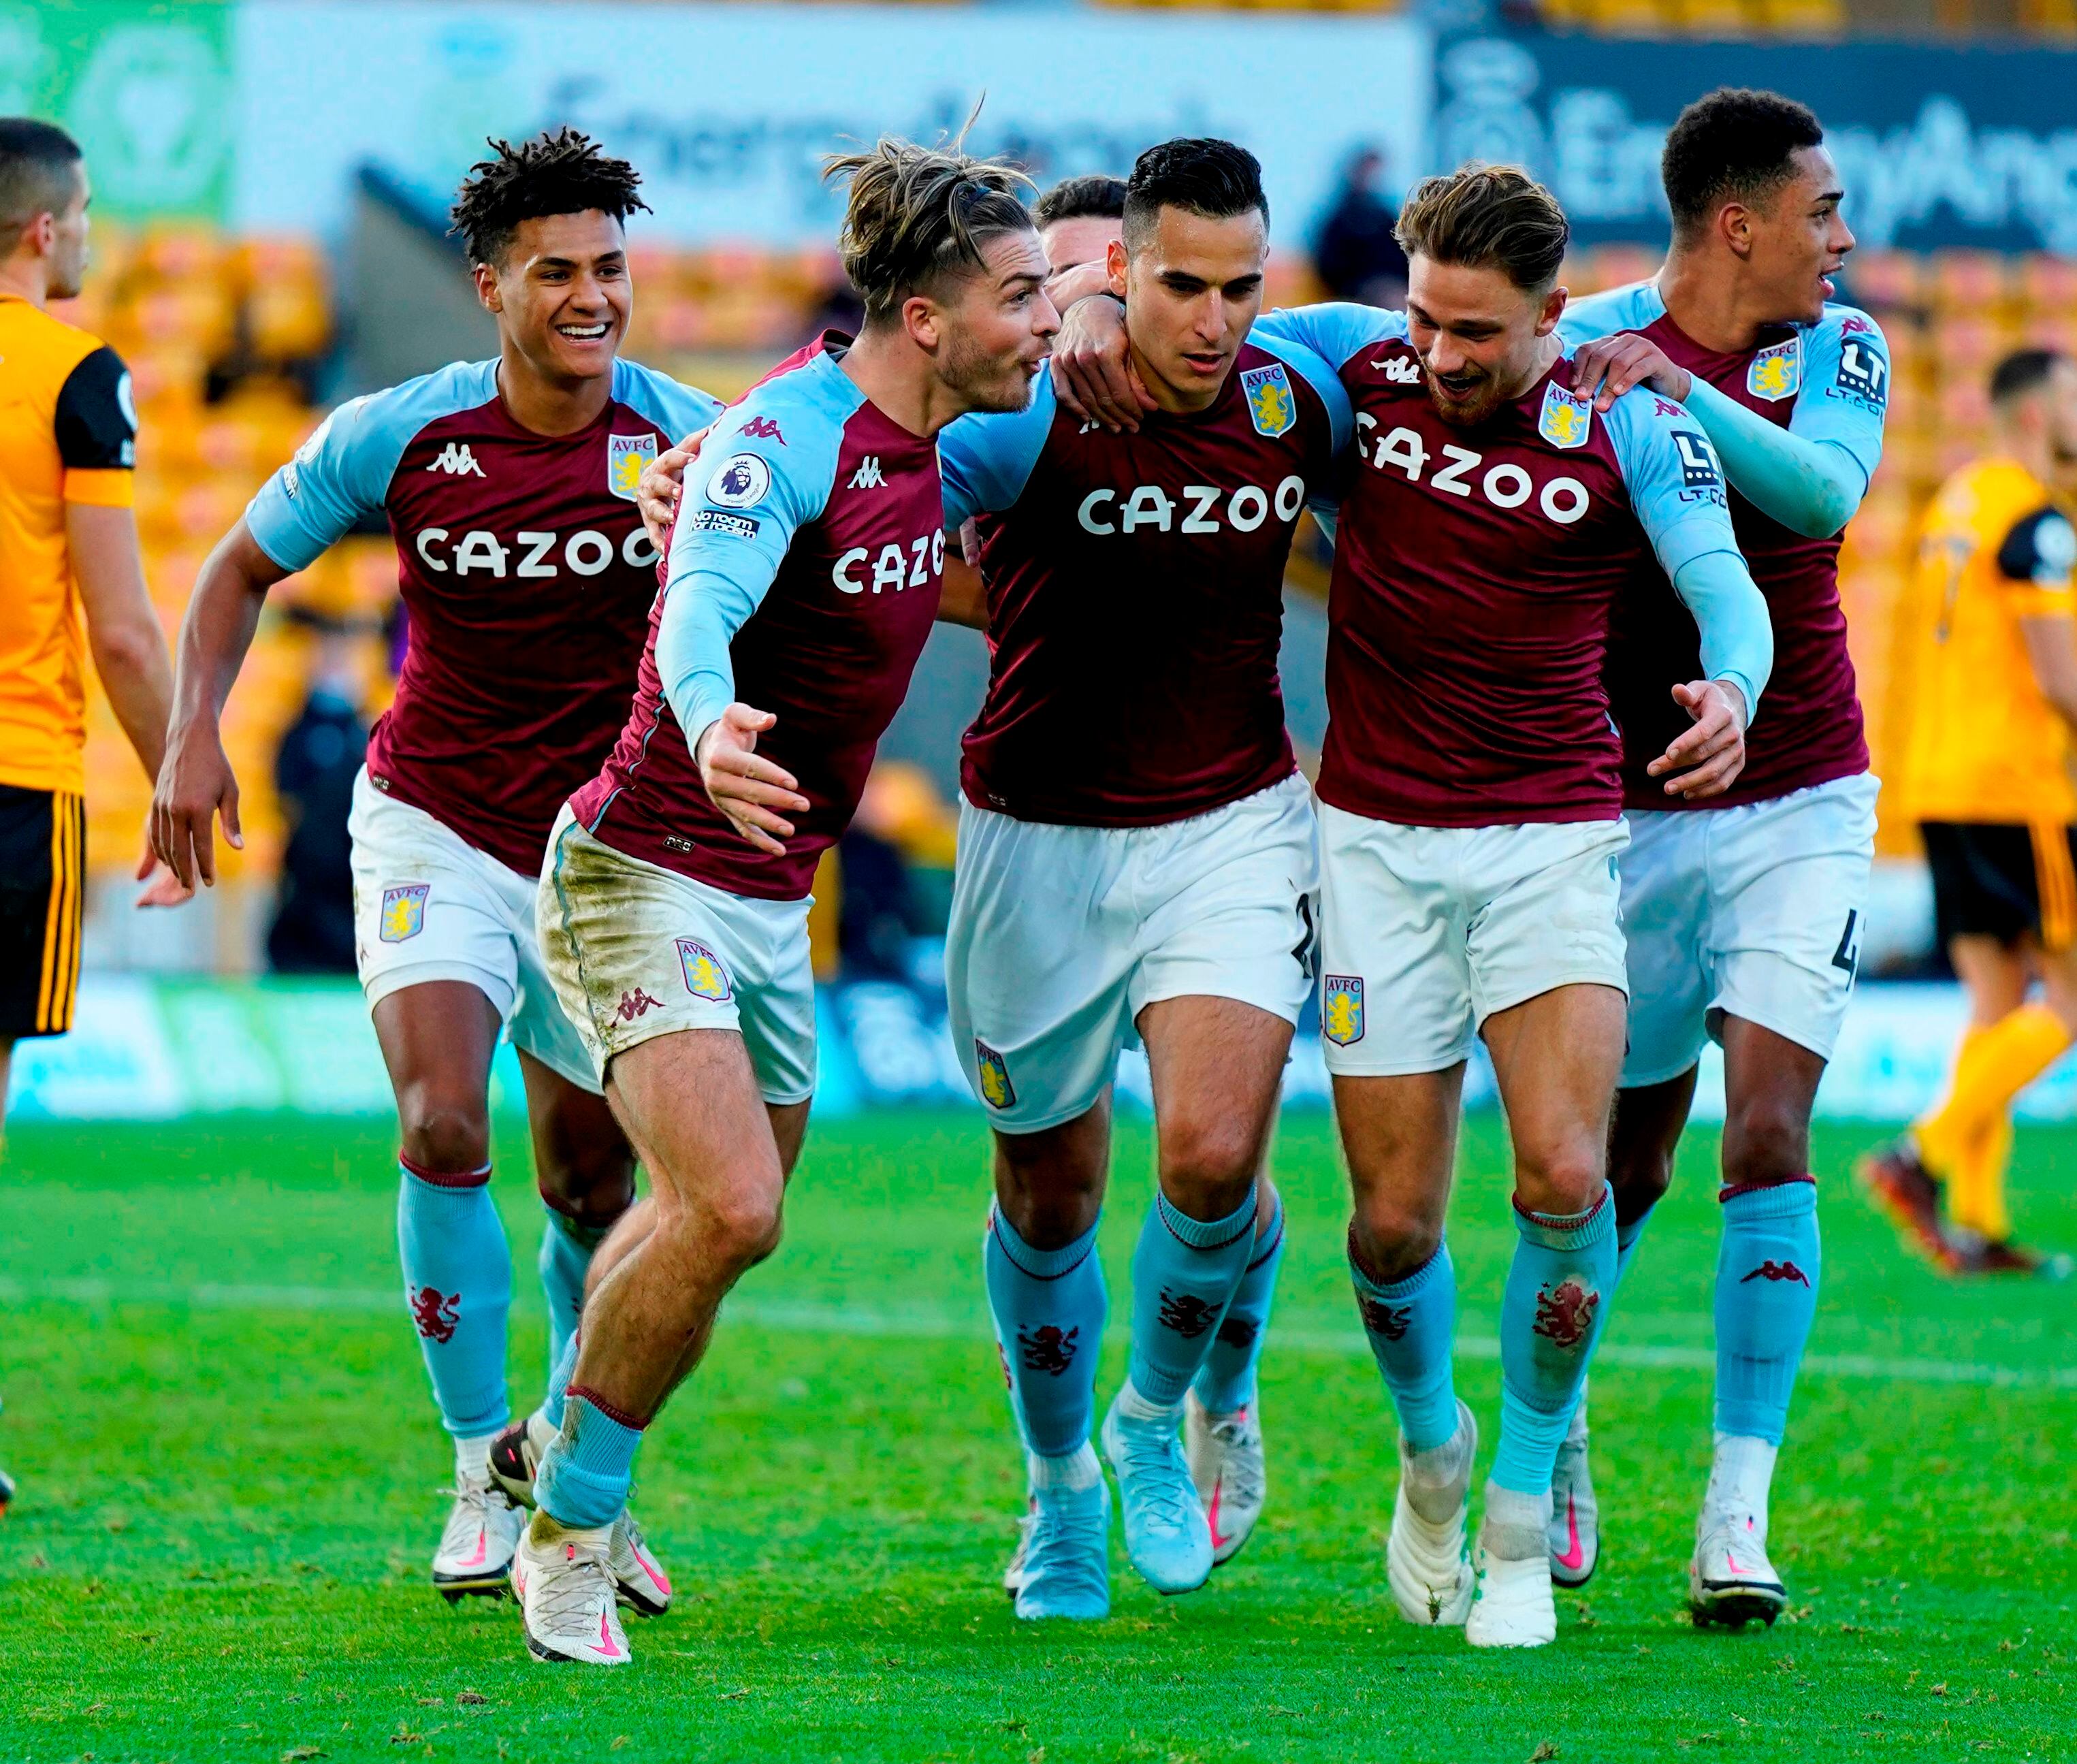 Aston Villa's Dutch striker Anwar El Ghazi (C) celebrates with teammates after he kicks the penalty and scores his team's first goal during the English Premier League football match between Wolverhampton Wanderers and Aston Villa at the Molineux stadium in Wolverhampton, central England on December 12, 2020. (Photo by Tim Keeton / POOL / AFP) / RESTRICTED TO EDITORIAL USE. No use with unauthorized audio, video, data, fixture lists, club/league logos or 'live' services. Online in-match use limited to 120 images. An additional 40 images may be used in extra time. No video emulation. Social media in-match use limited to 120 images. An additional 40 images may be used in extra time. No use in betting publications, games or single club/league/player publications. / 